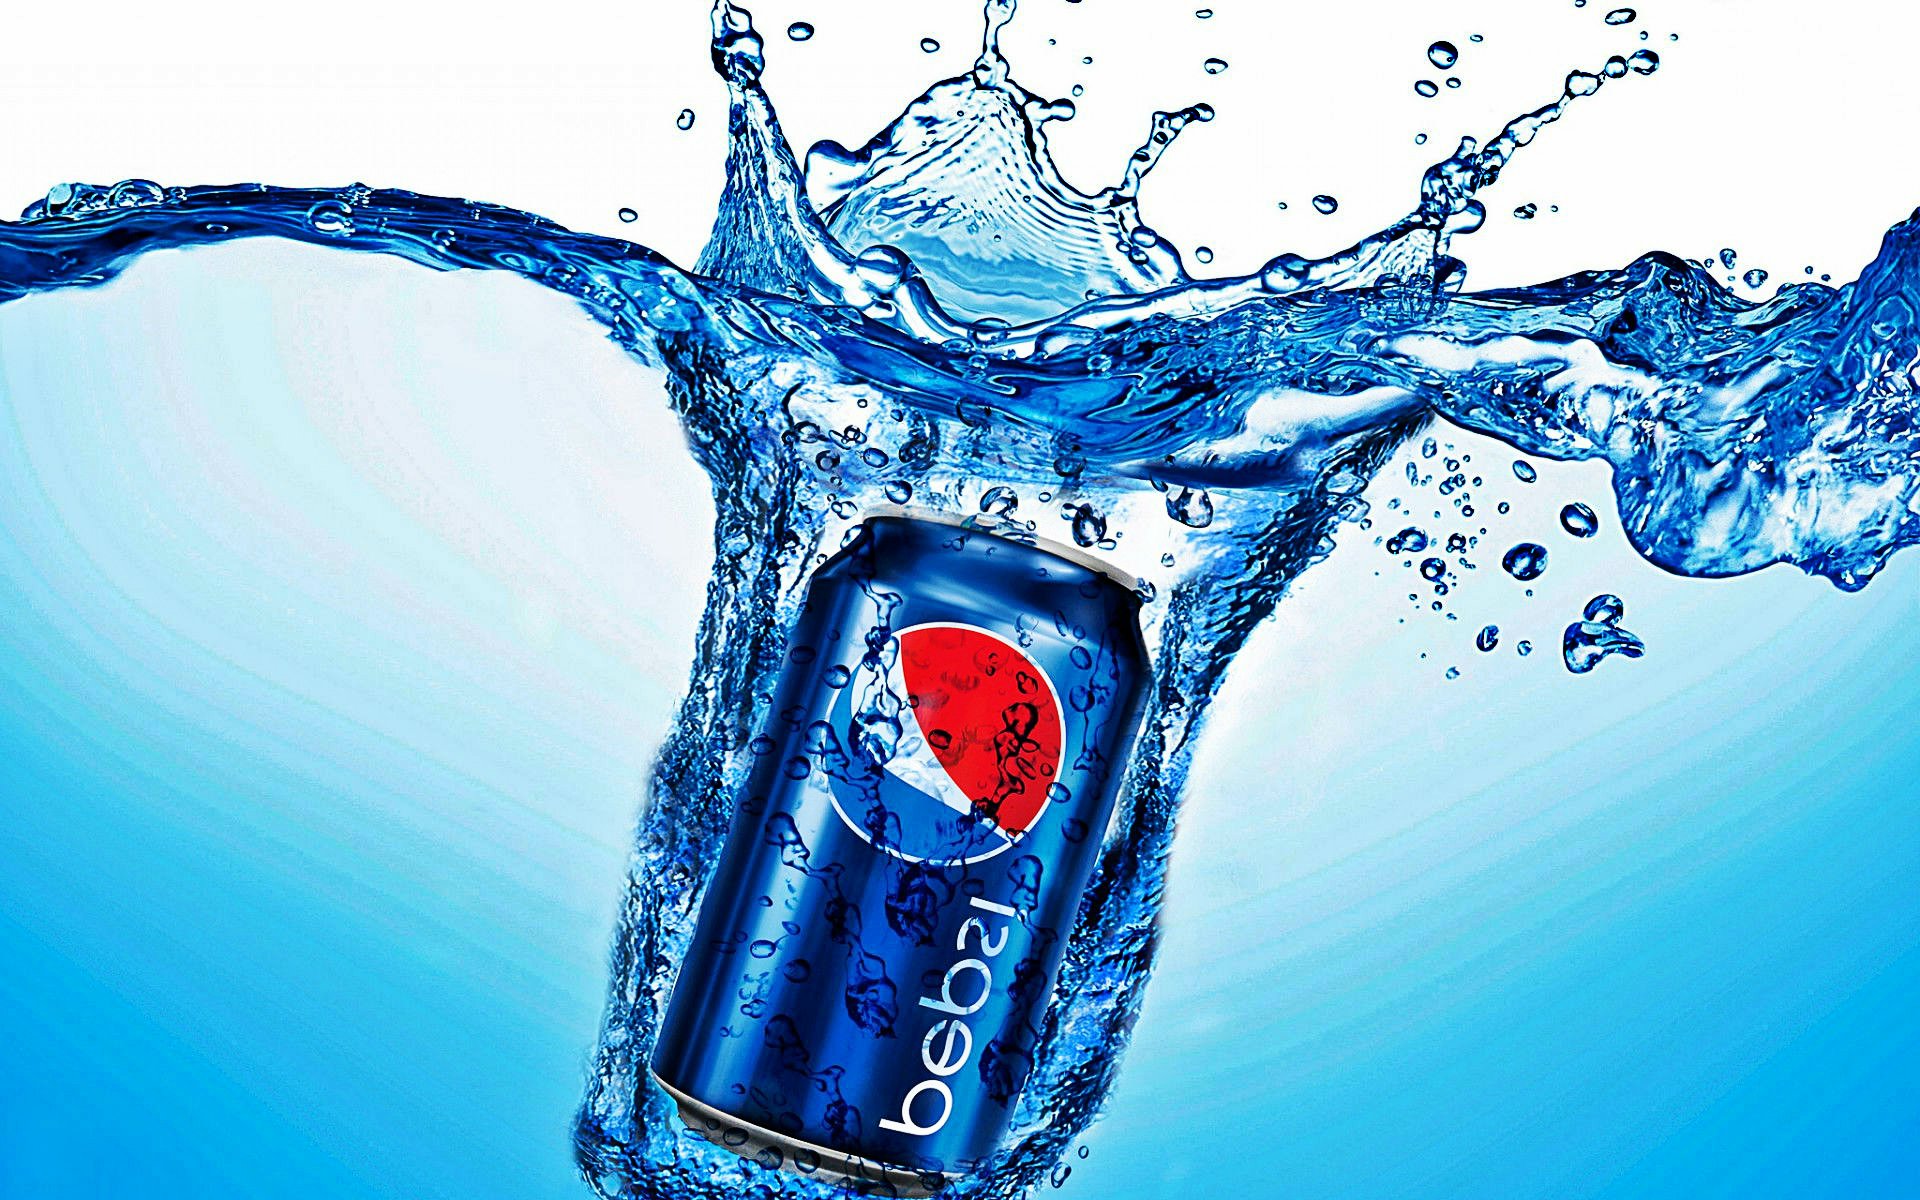 pepsi logo wallpapers hd wallpapers ys provides the latest collection 1920x1200